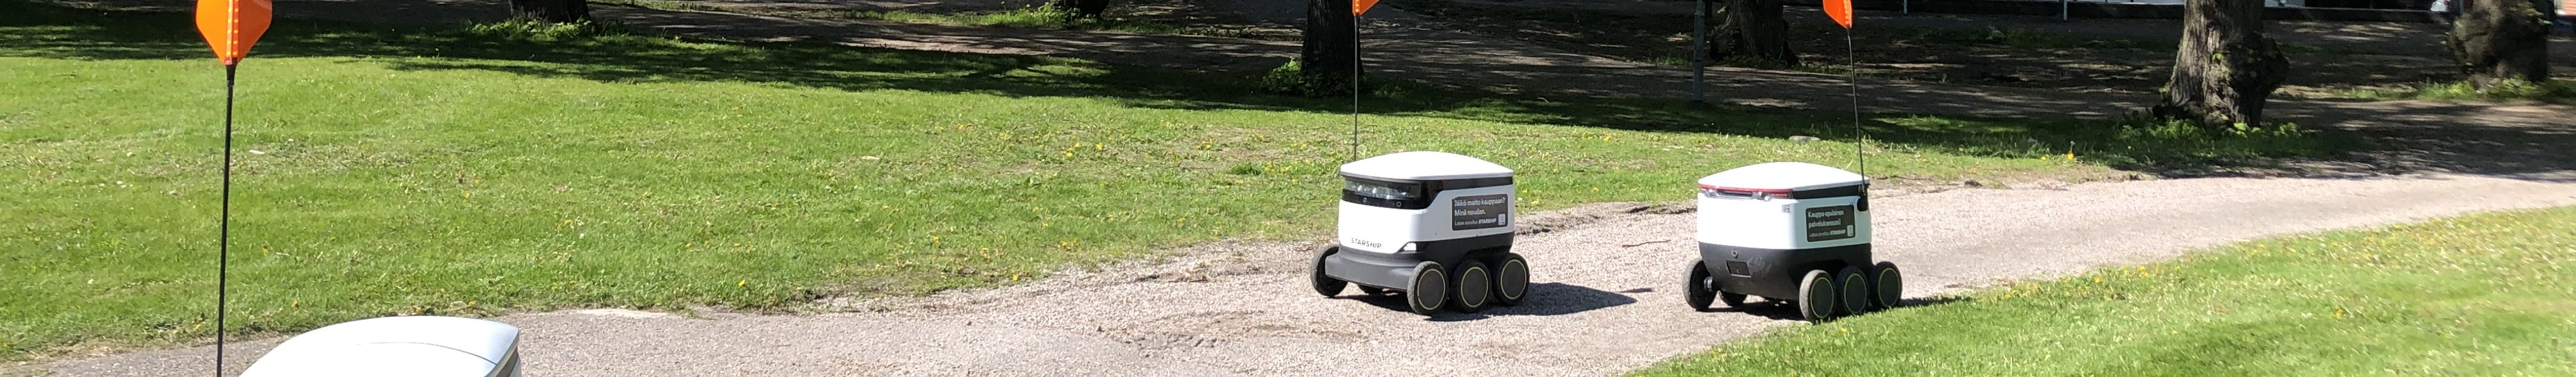 Starship food delivery robots driving in a park